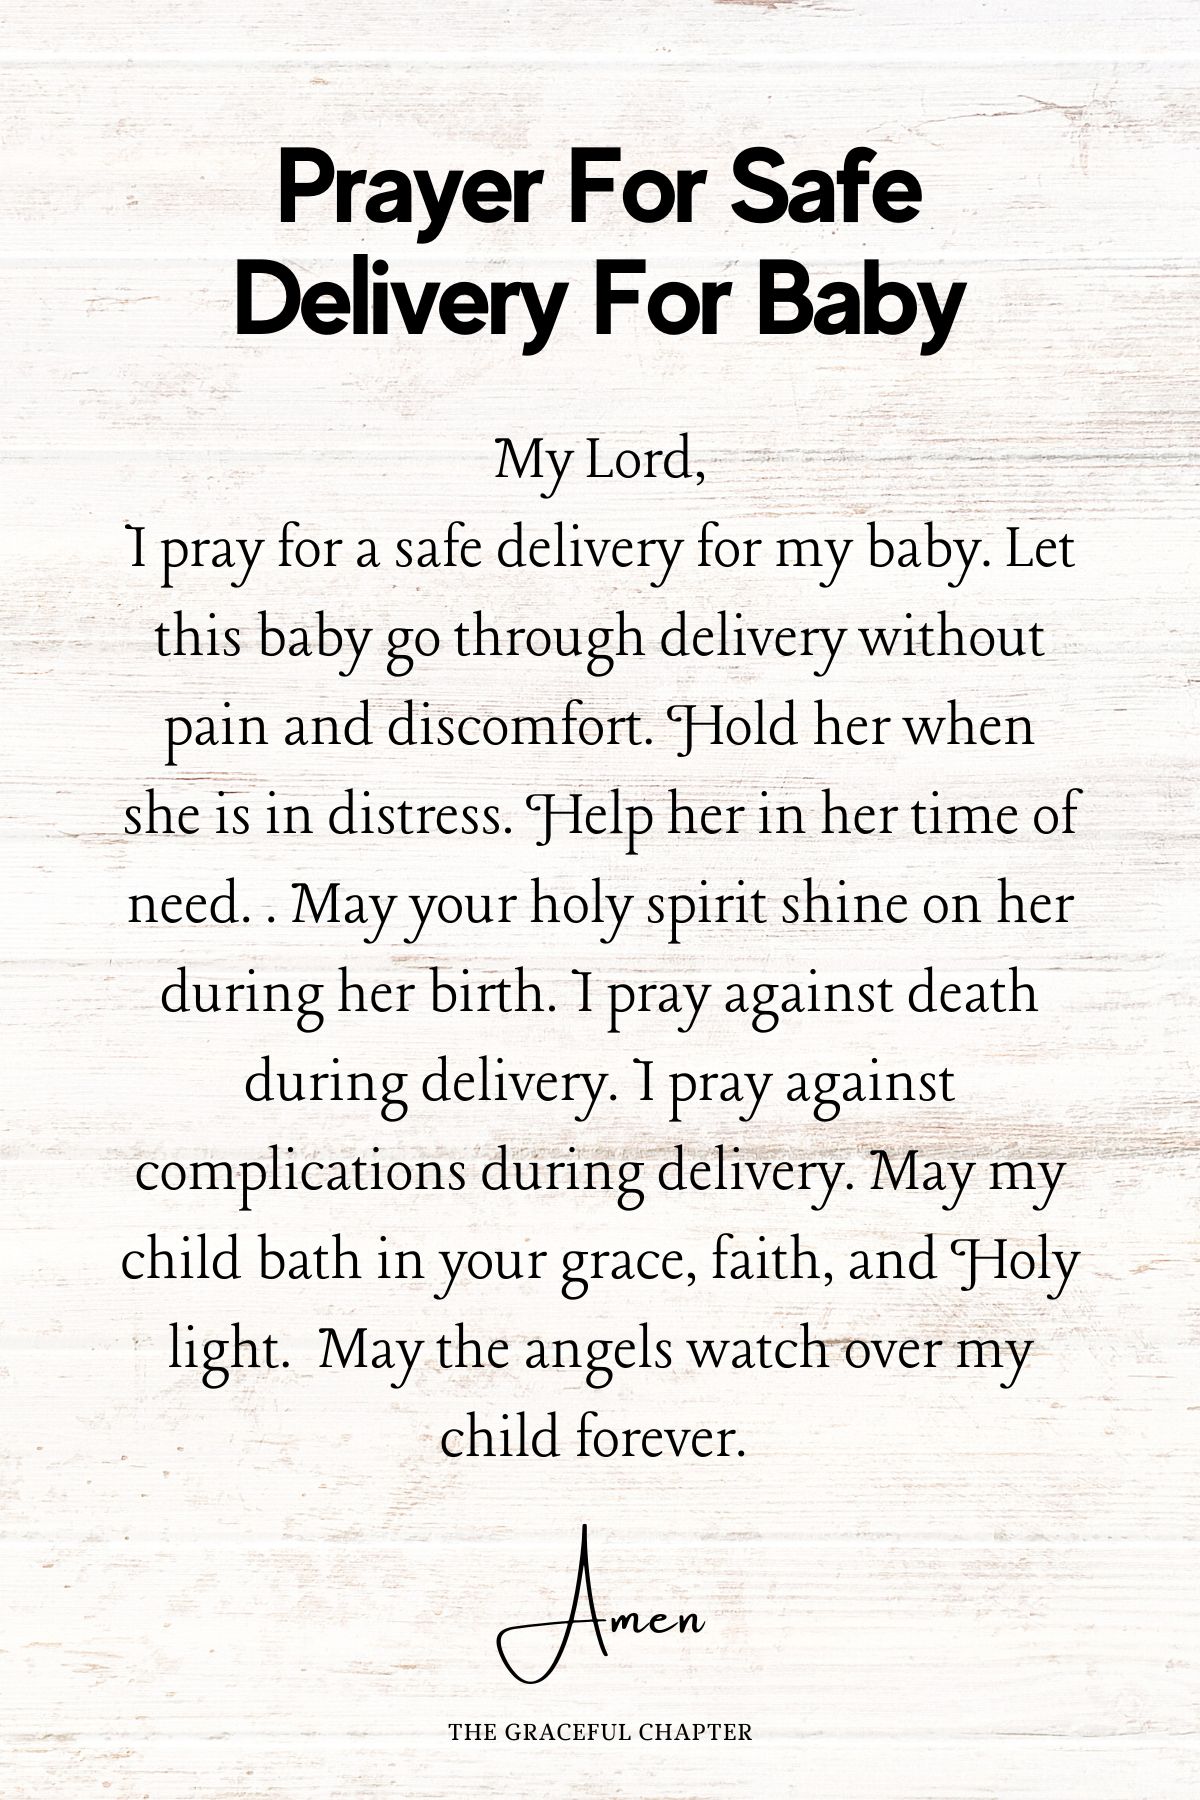 Prayer for safe delivery for baby